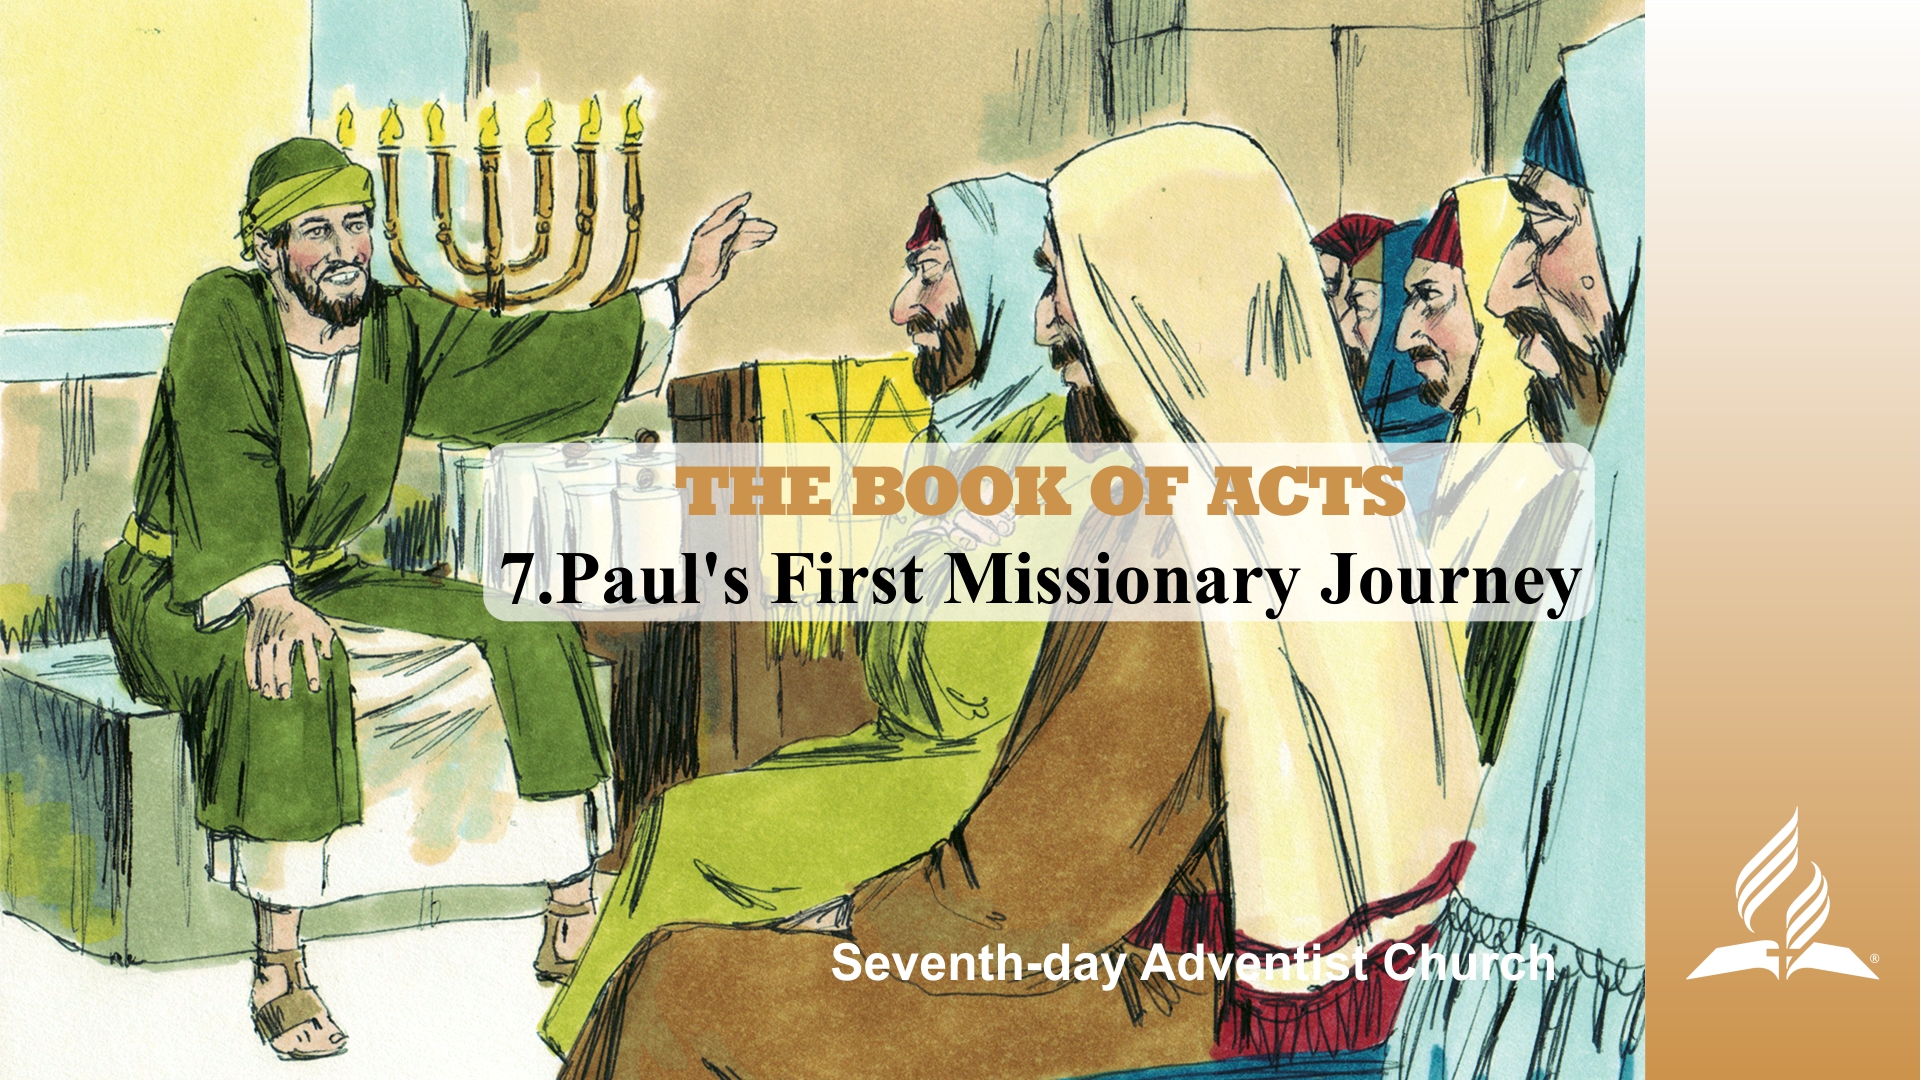 Missionary journey first pauls Acts 13:4